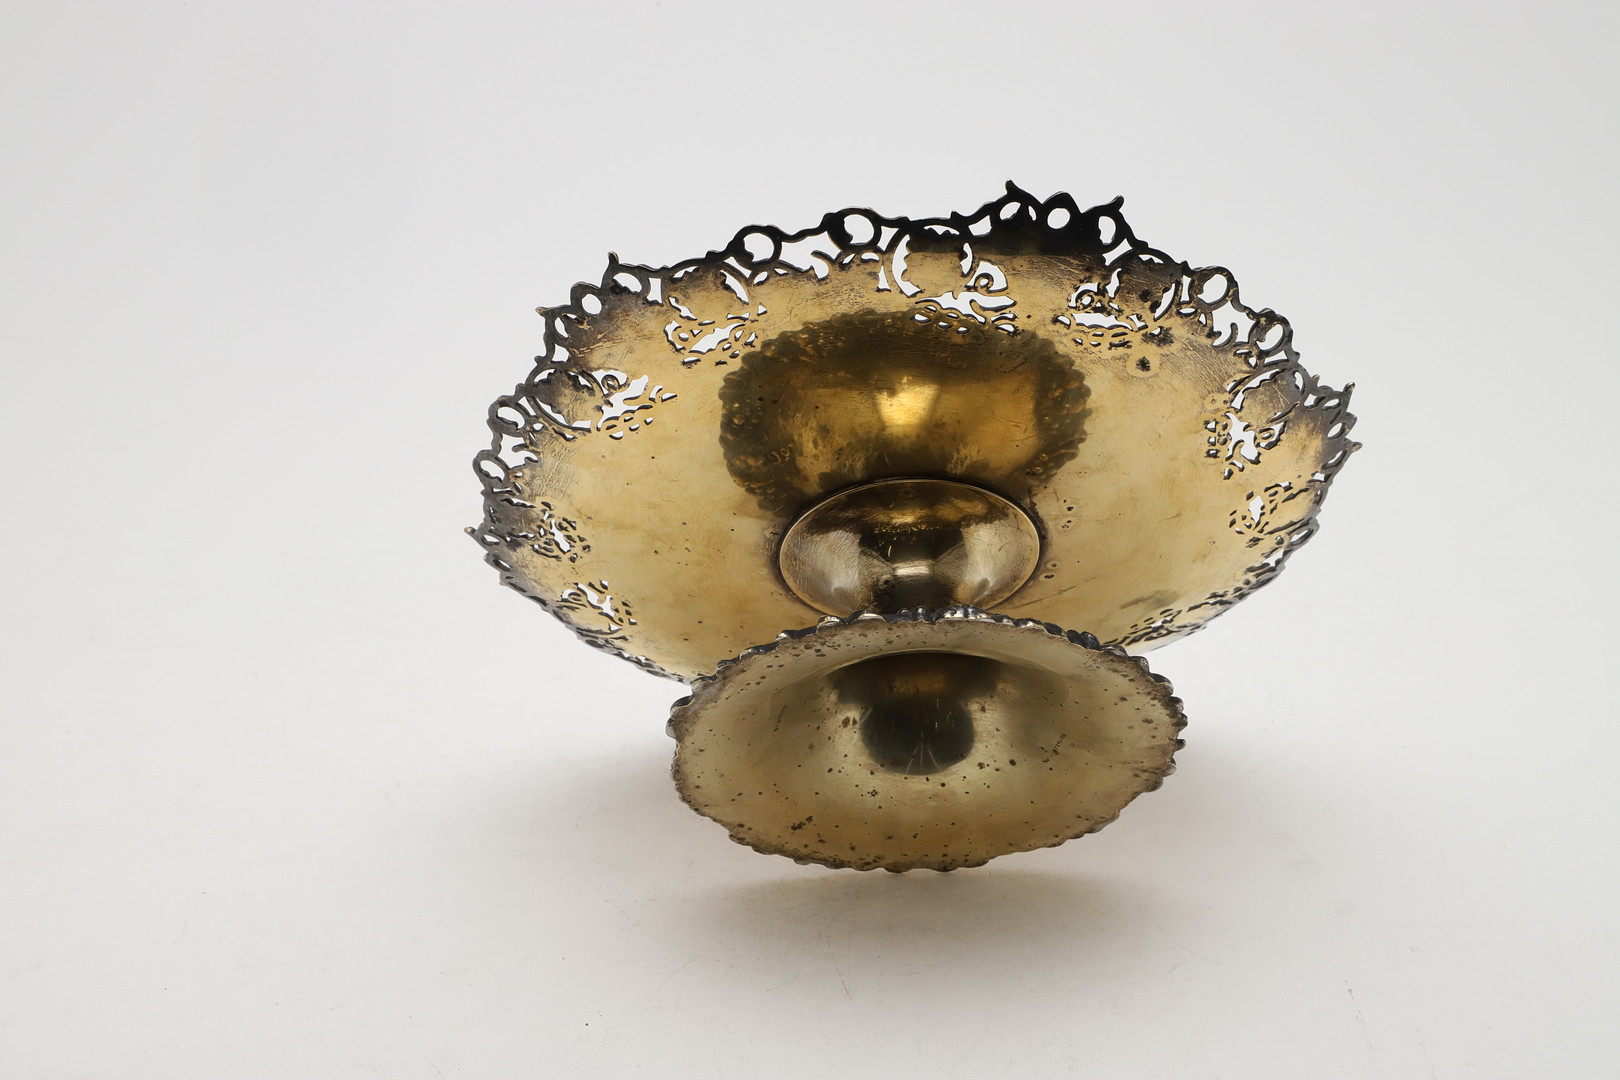 A LATE 19TH/ EARLY 20TH CENTURY SILVERGILT FRUIT OR DESSERT STAND. - Image 4 of 6